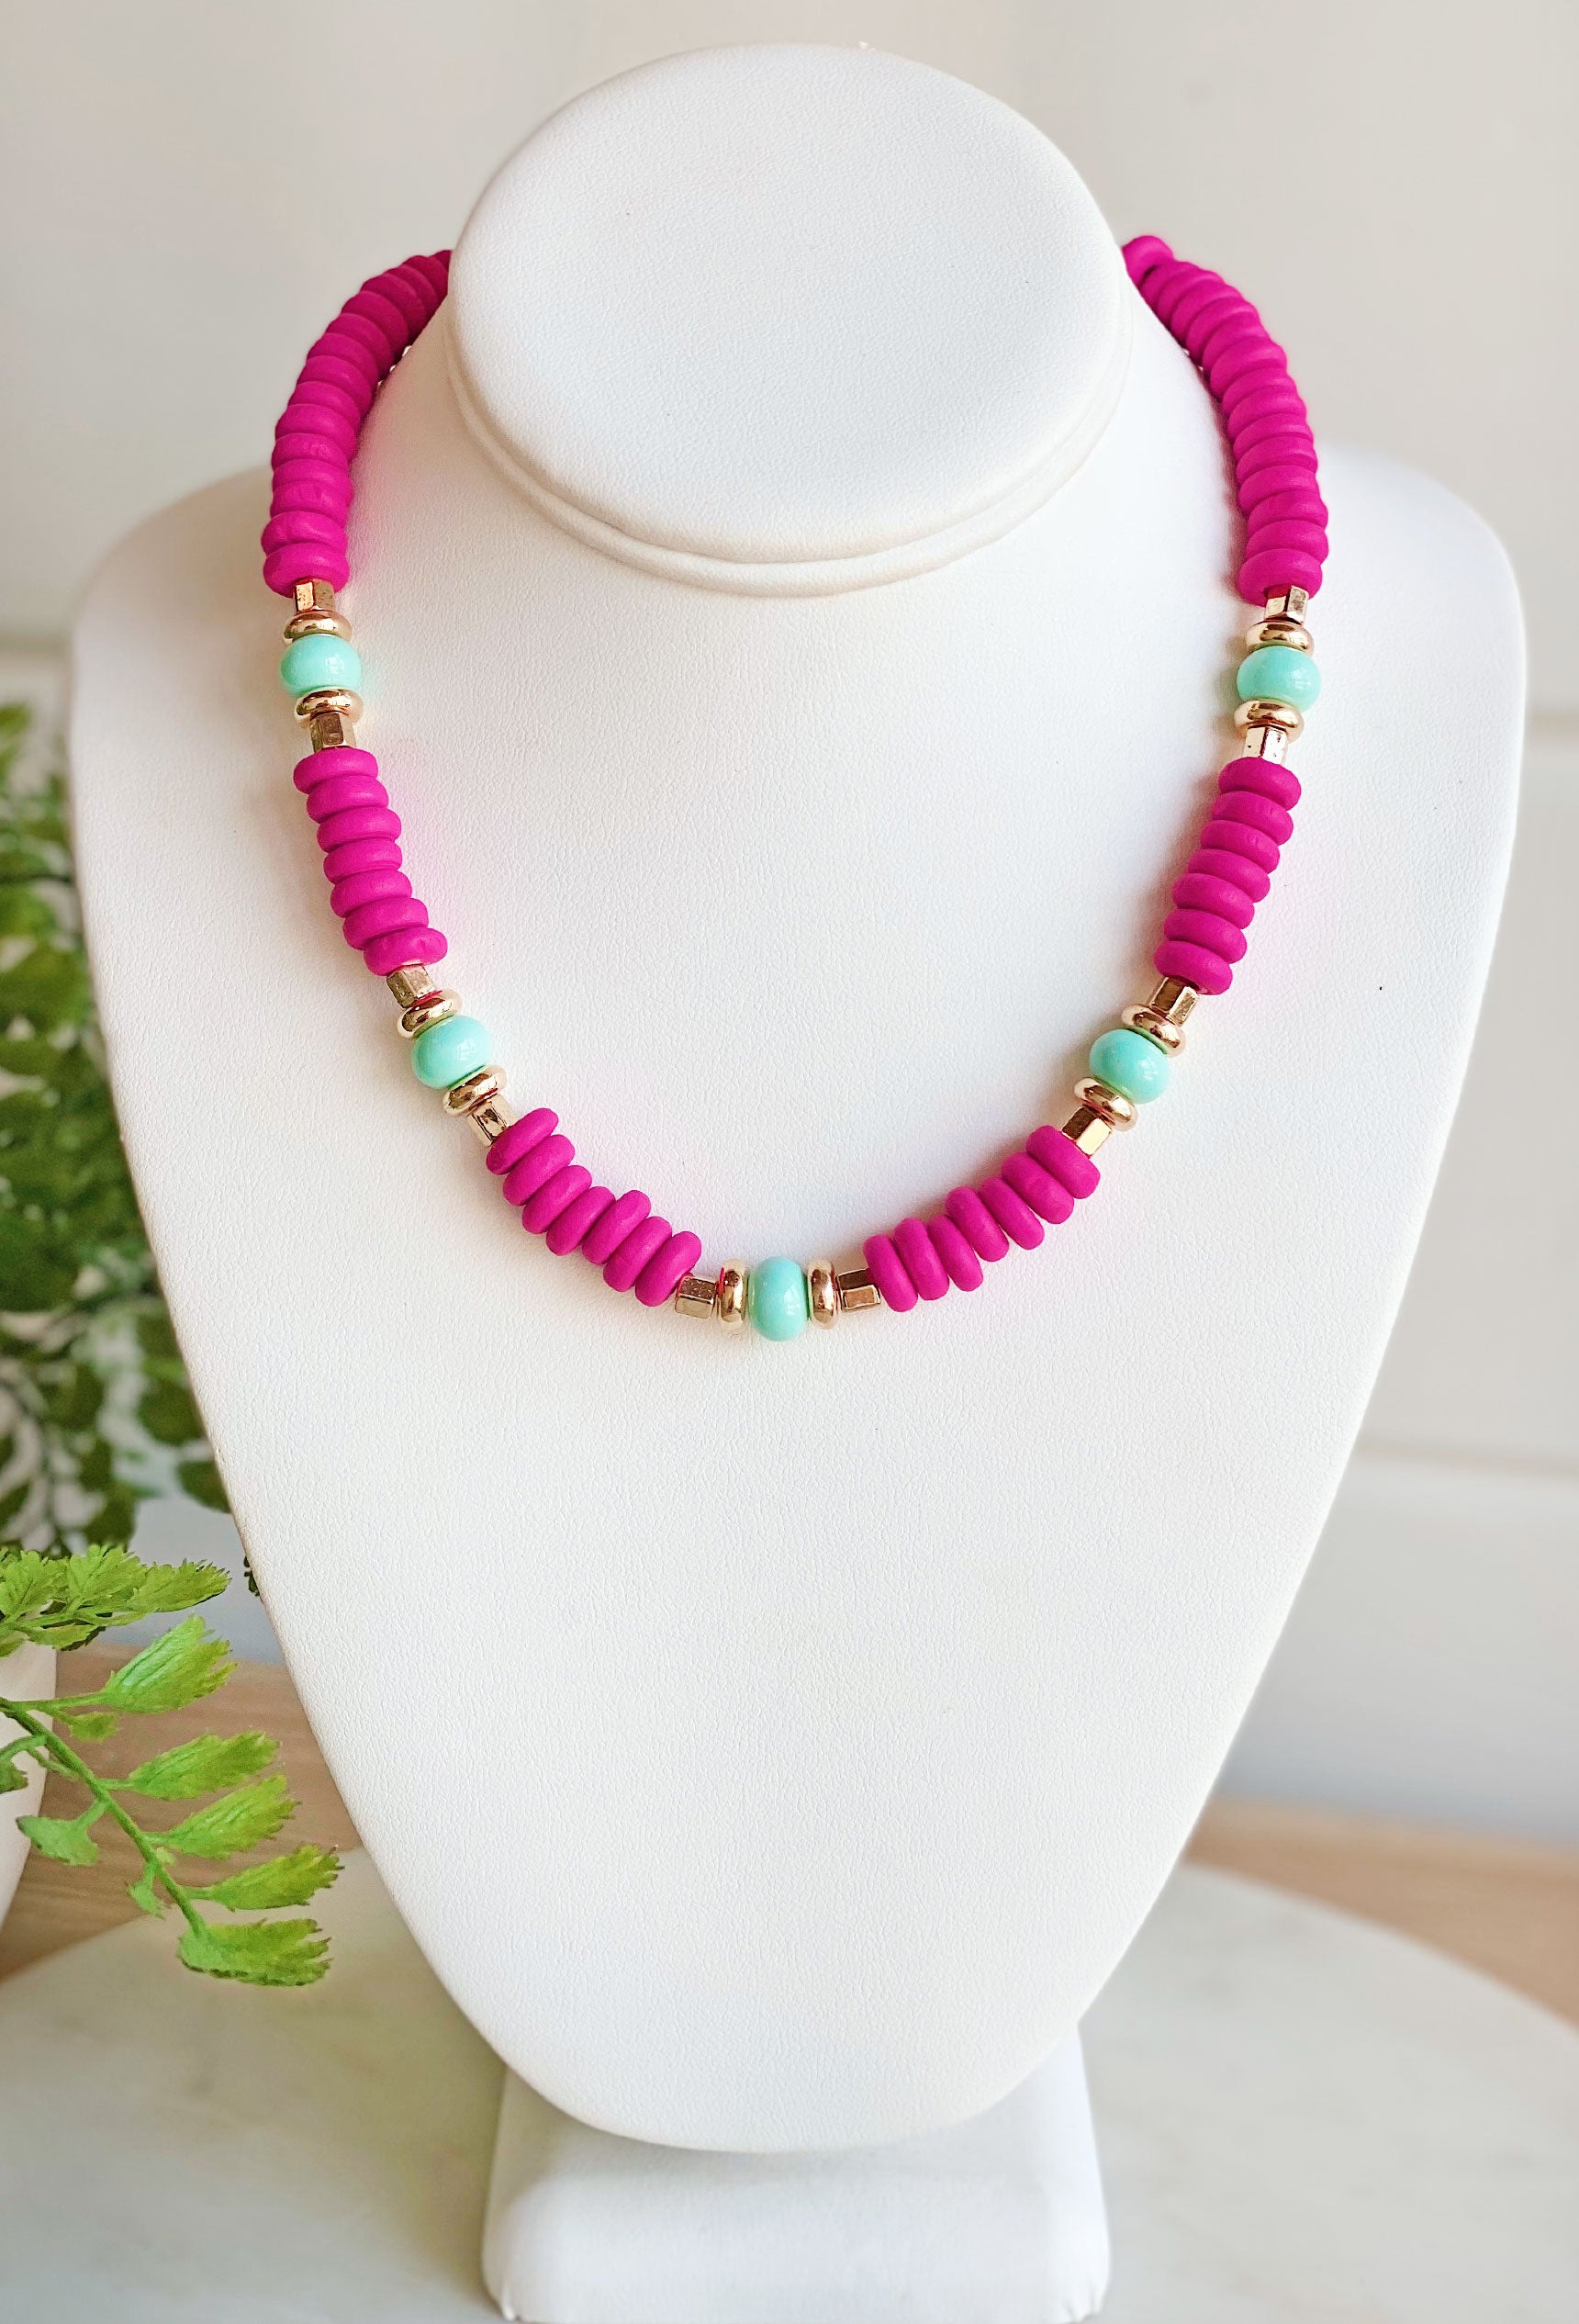 Beautiful Soul Beaded Necklace, pink beaded necklace mixed with gold and mint colored beads